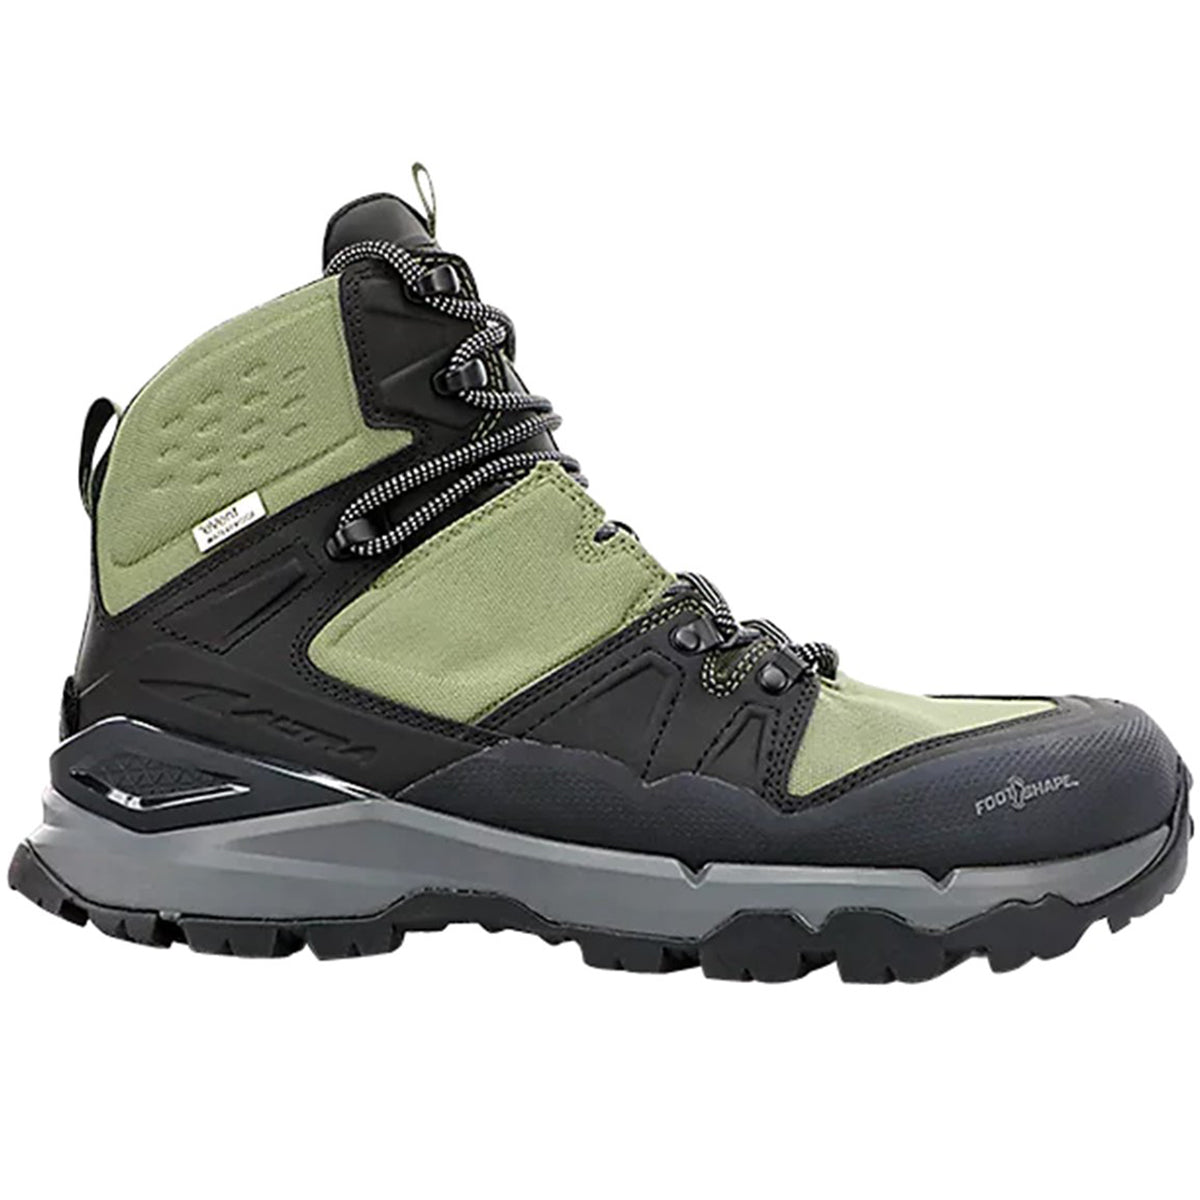 Altra Tushar in Altra Tushar Boot by Altra | Footwear - goHUNT Shop by GOHUNT | Altra - GOHUNT Shop